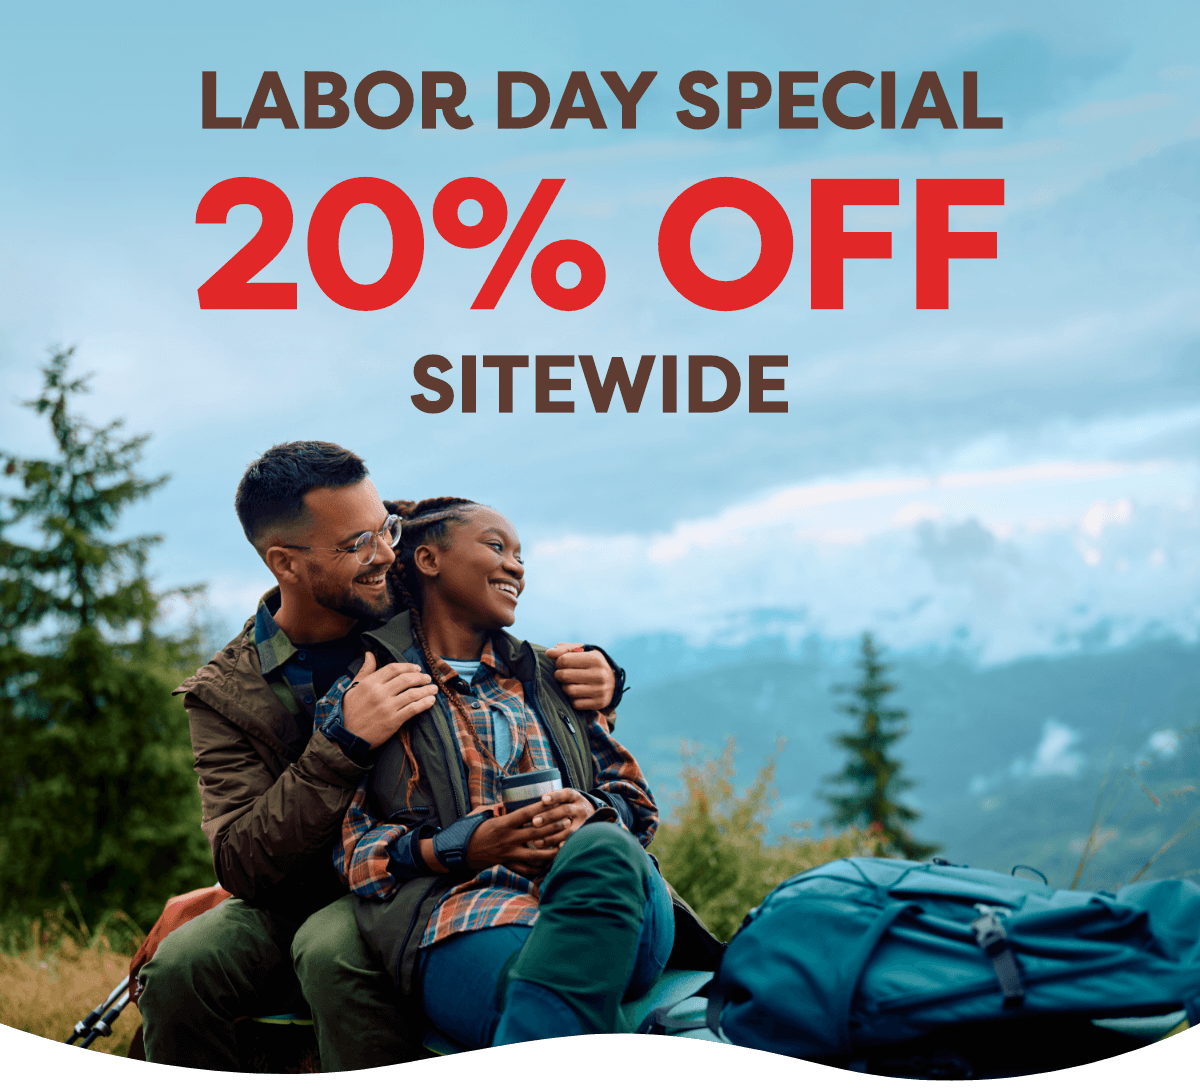 Labor Day Special 20% Off Sitewide